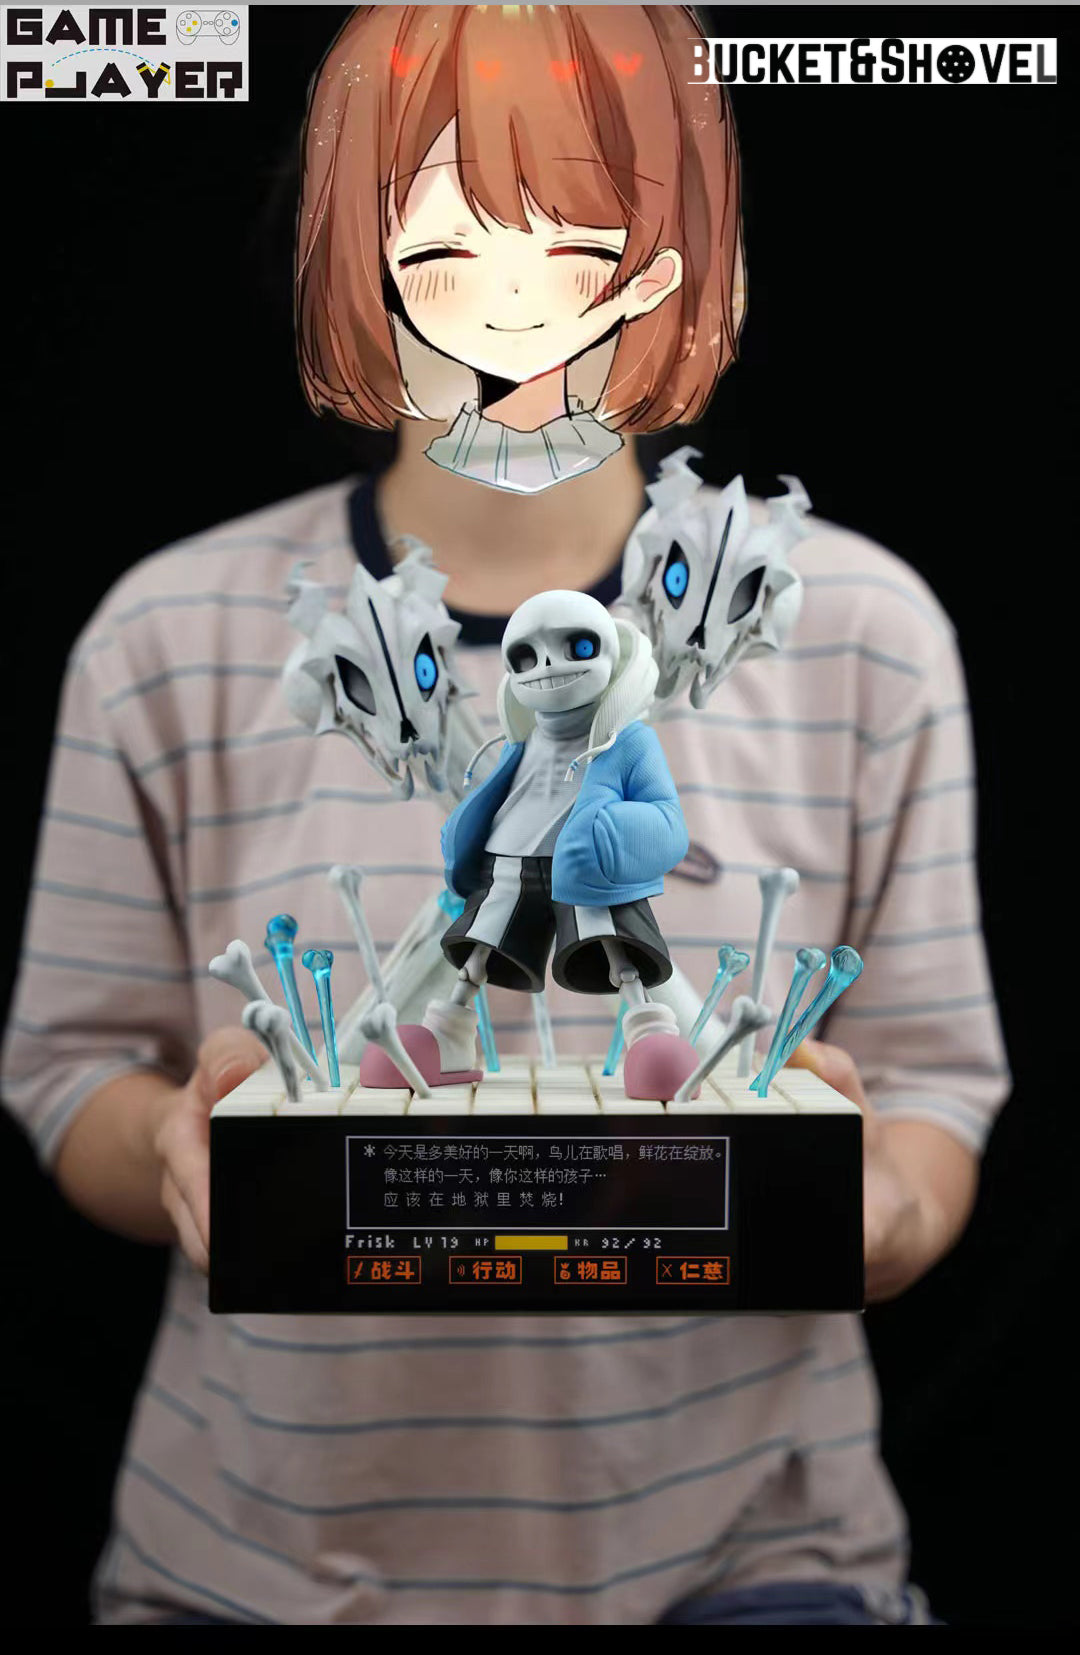 * In Stock * Extra Edition Improved LED Eyes! GamePlayer Studio Undertale Sans